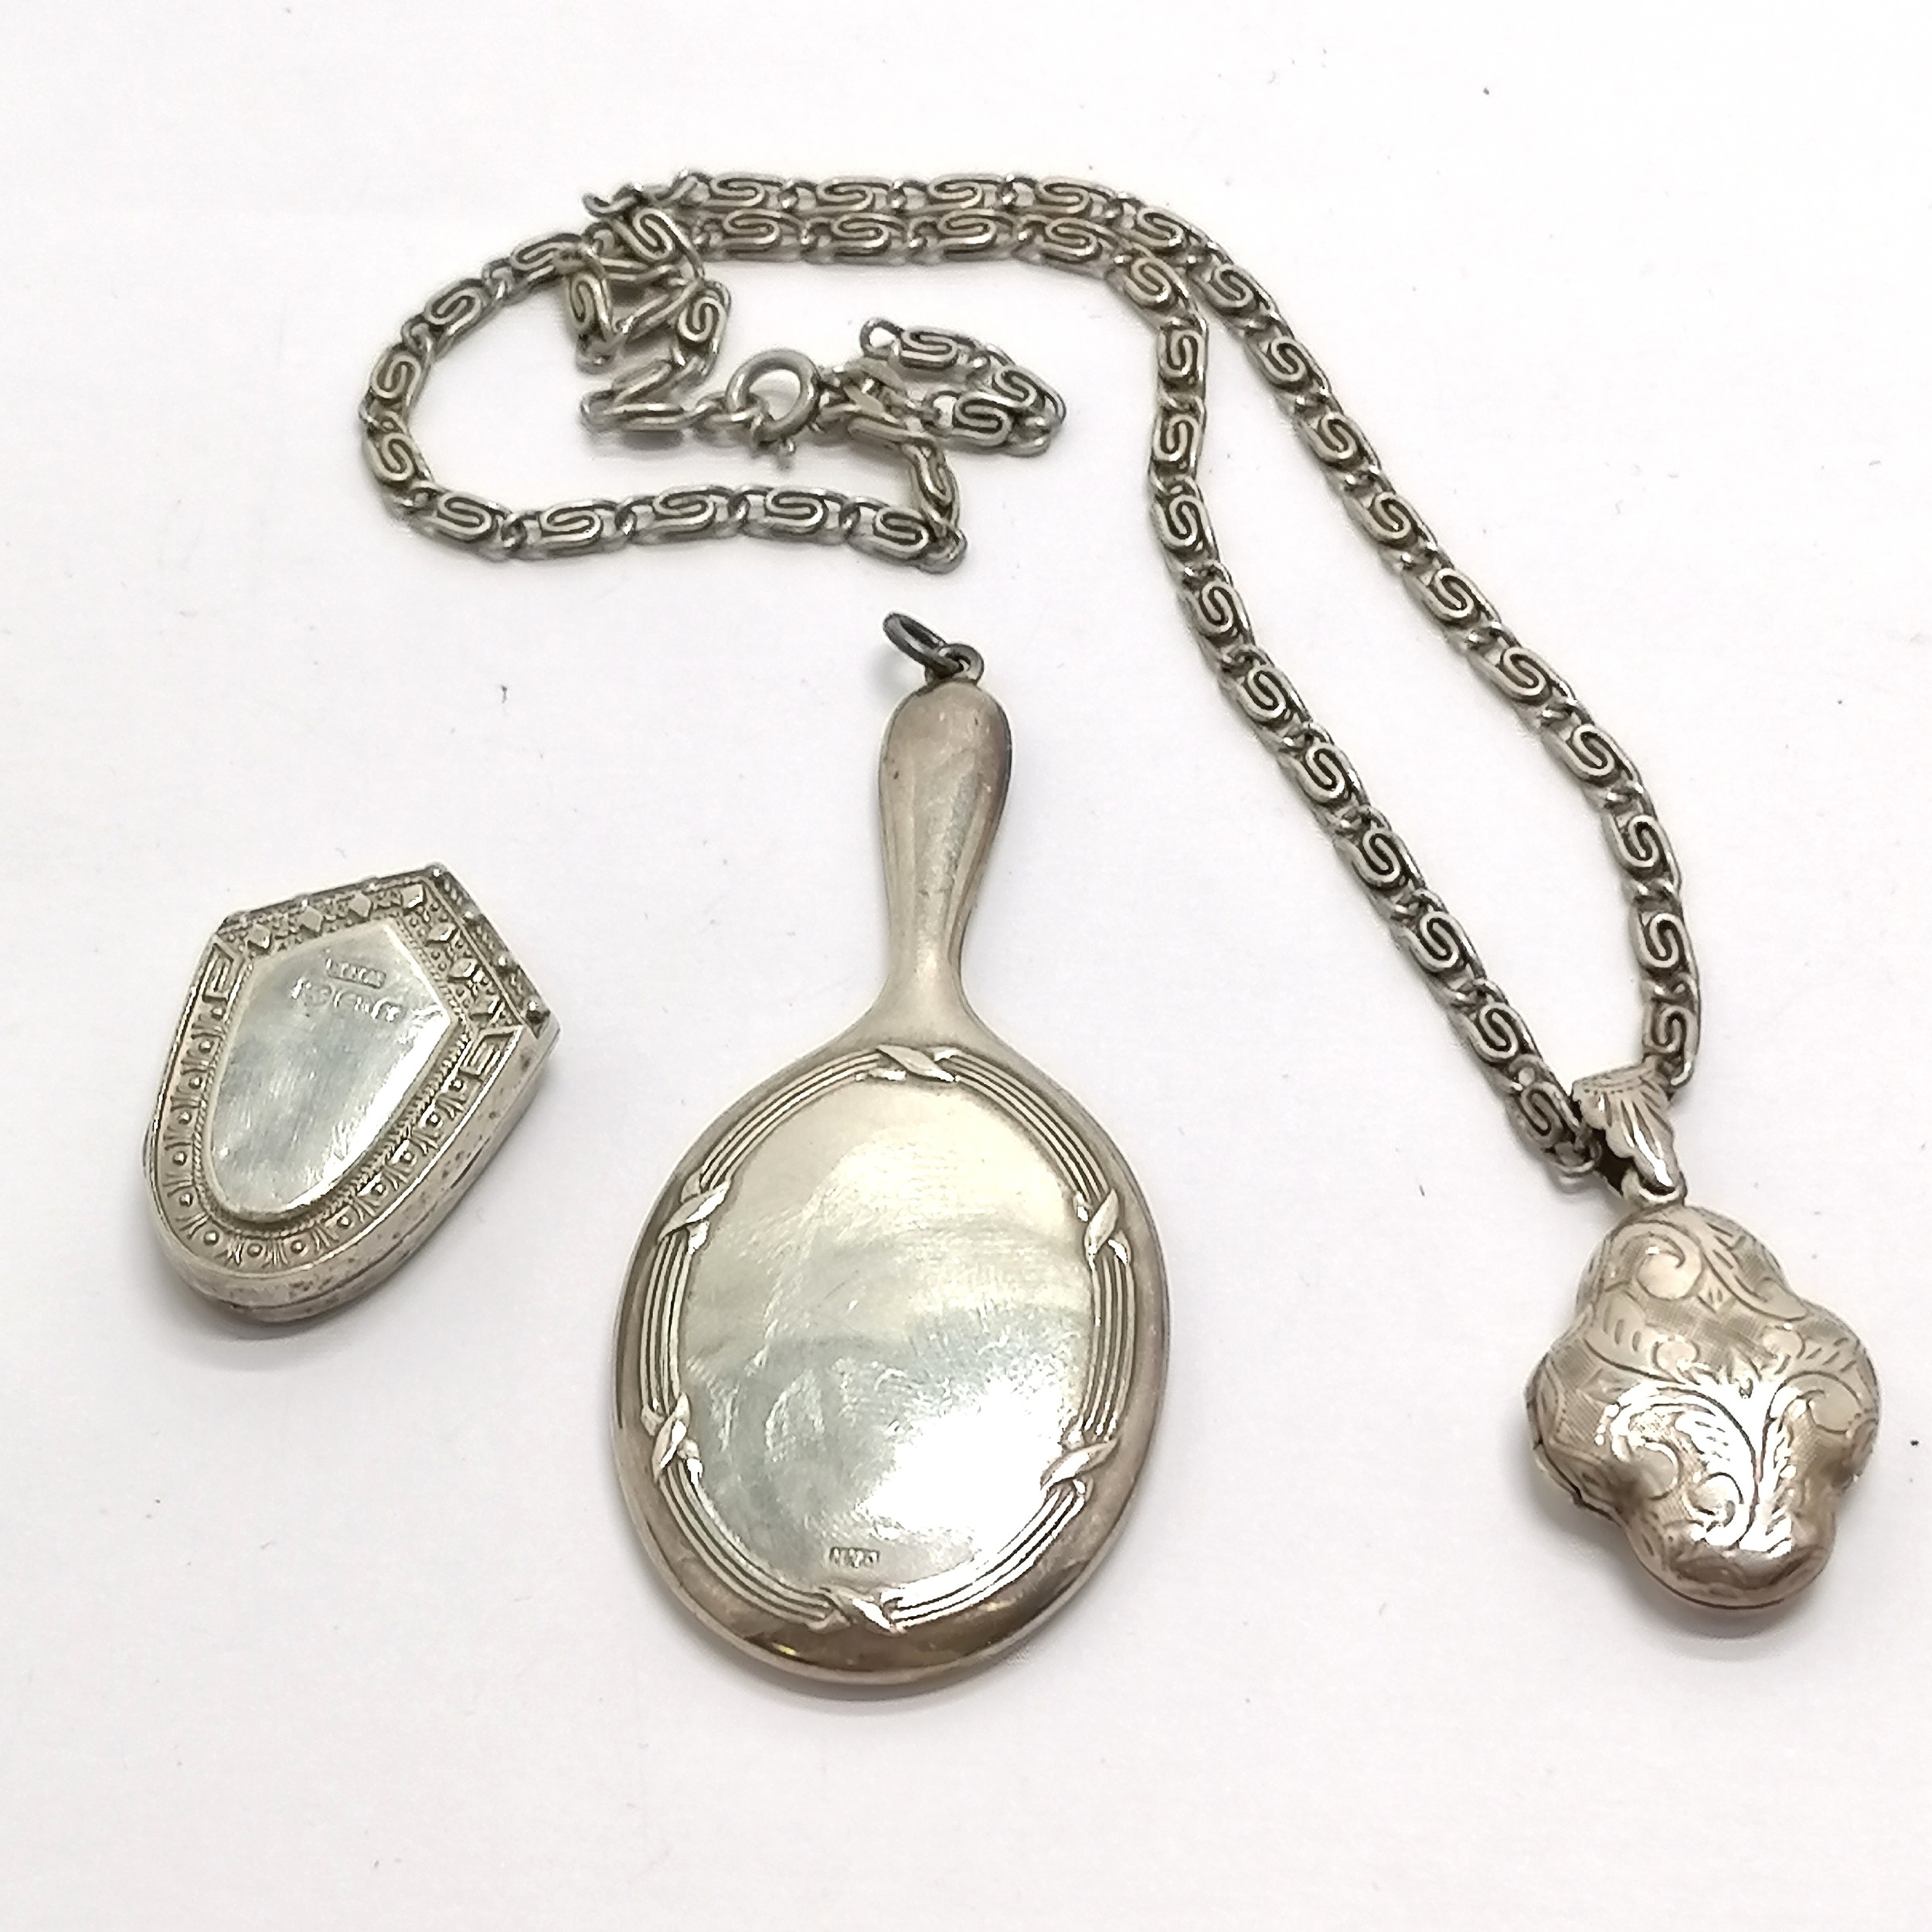 Antique miniature silver hallmarked mirror pendant t/w 2 silver lockets (1 on silver chain) - the - Image 2 of 2